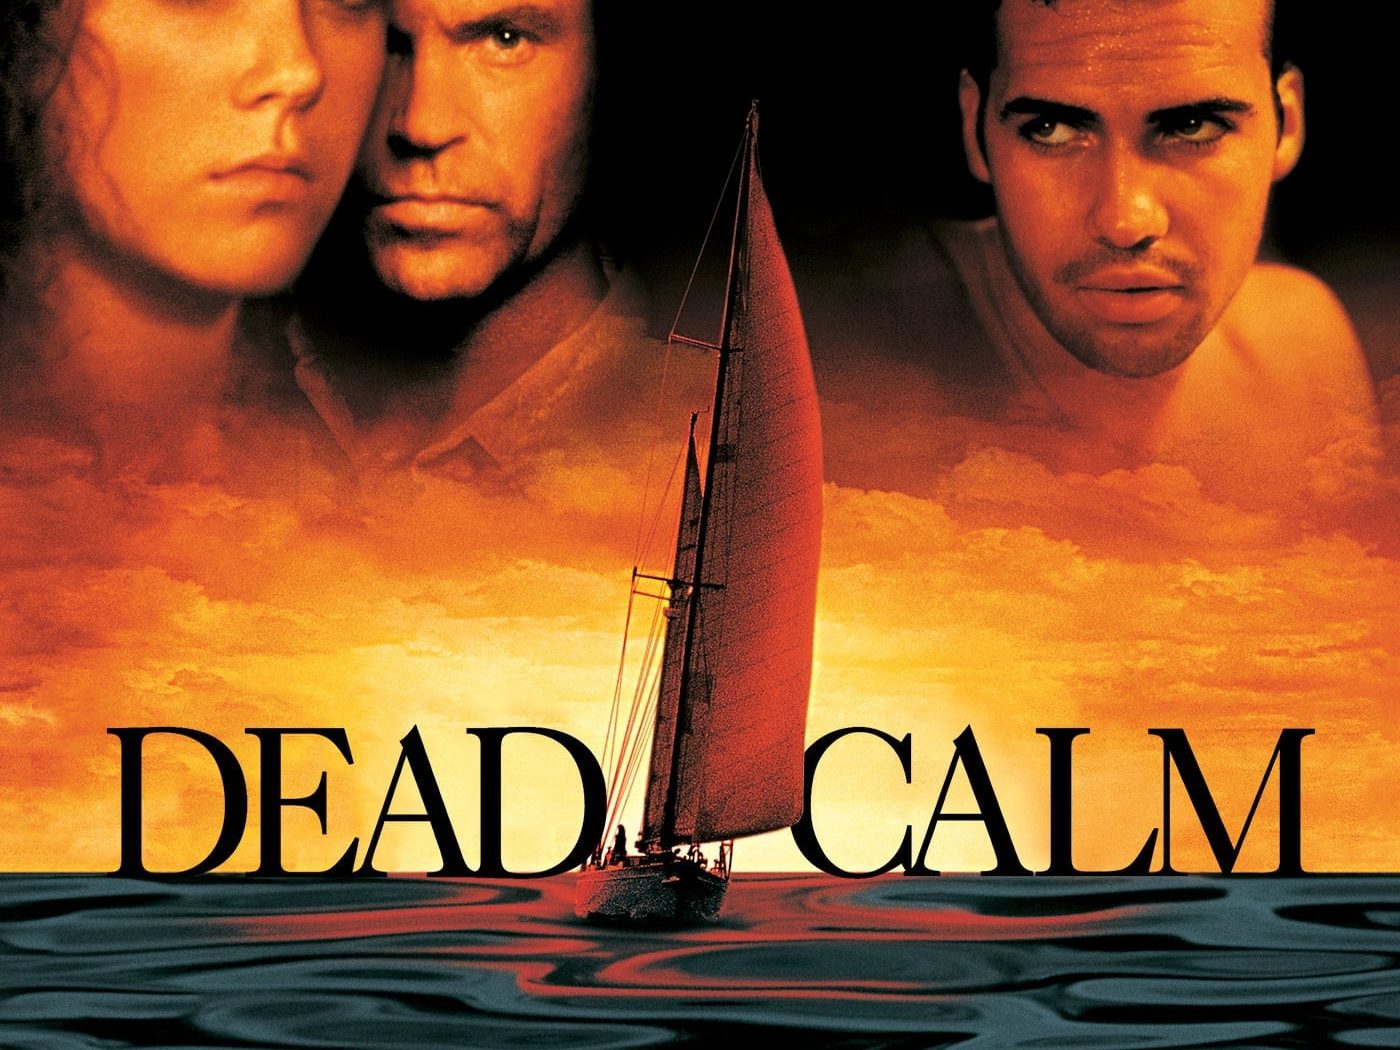 Poster for the movie "Dead Calm"